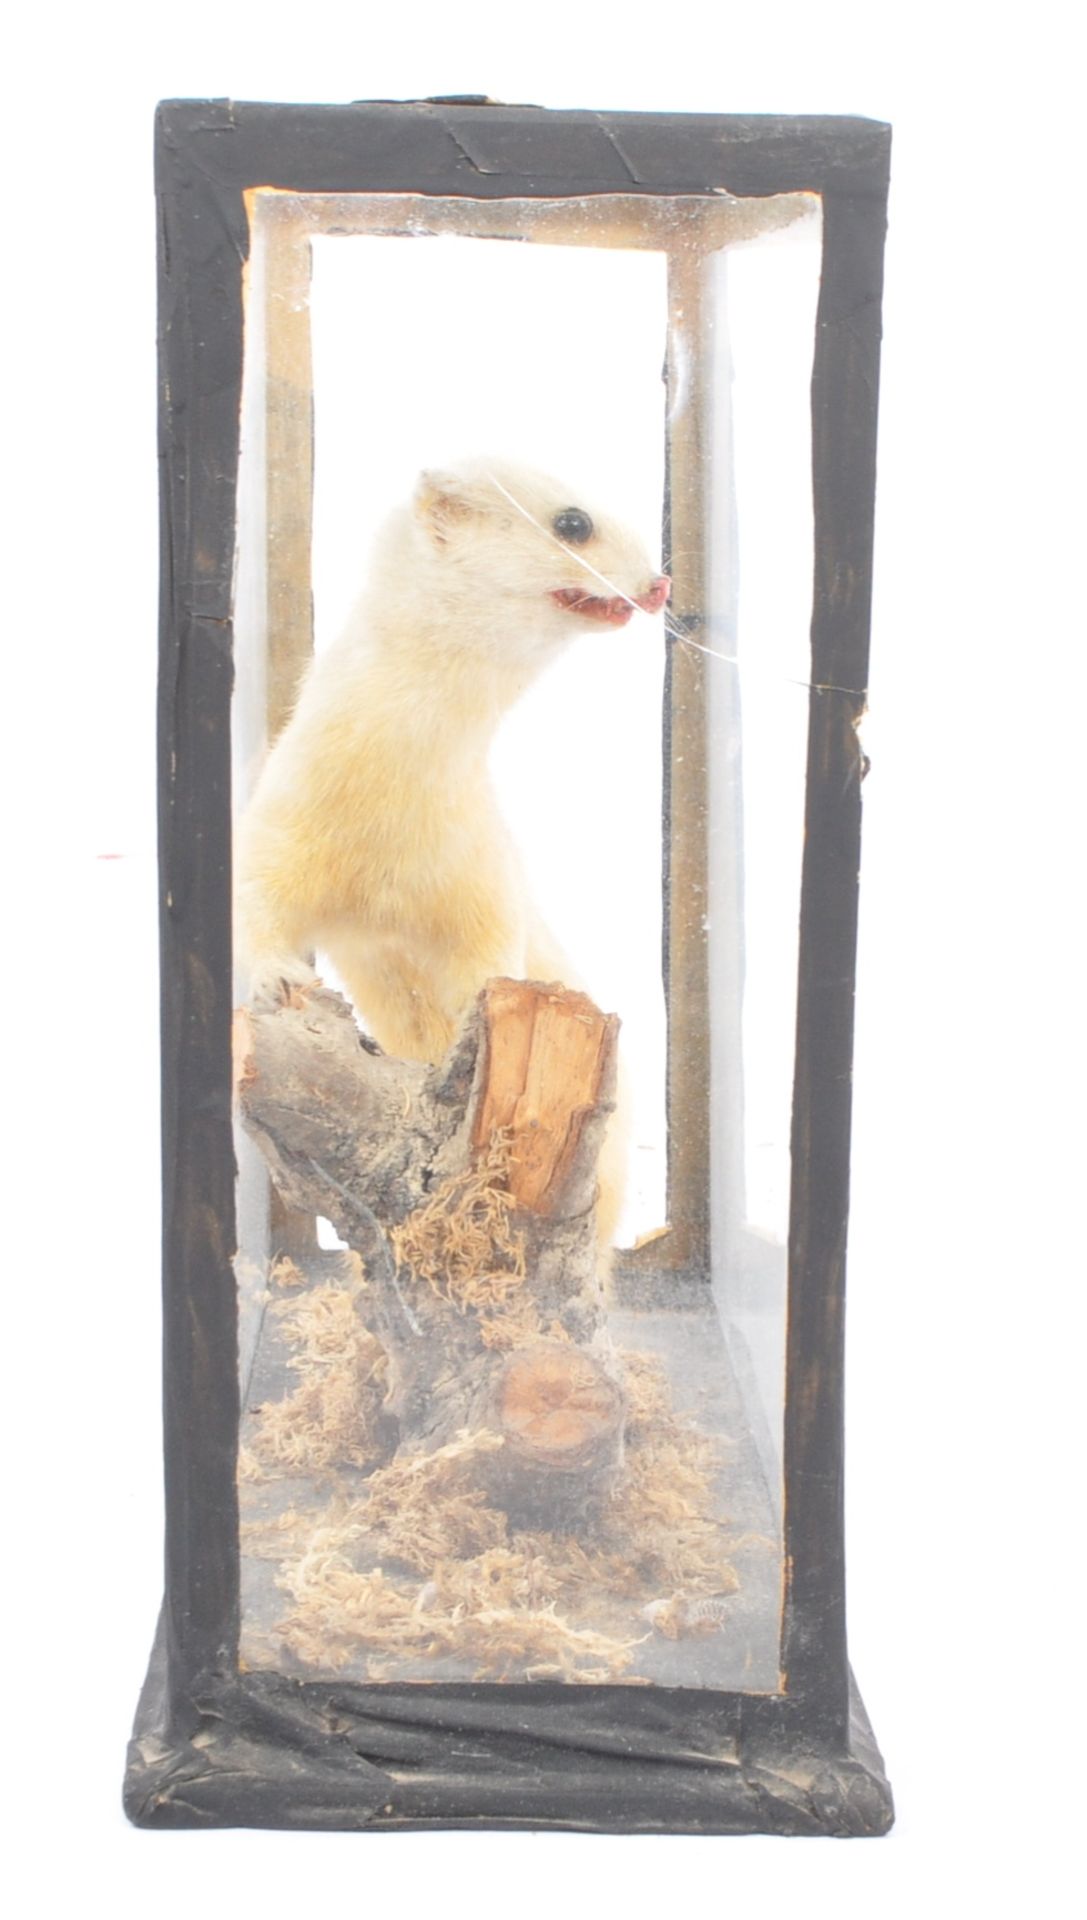 OF TAXIDERMY INTEREST - MID 20TH CENTURY STOAT / WEASEL CASED - Image 4 of 4